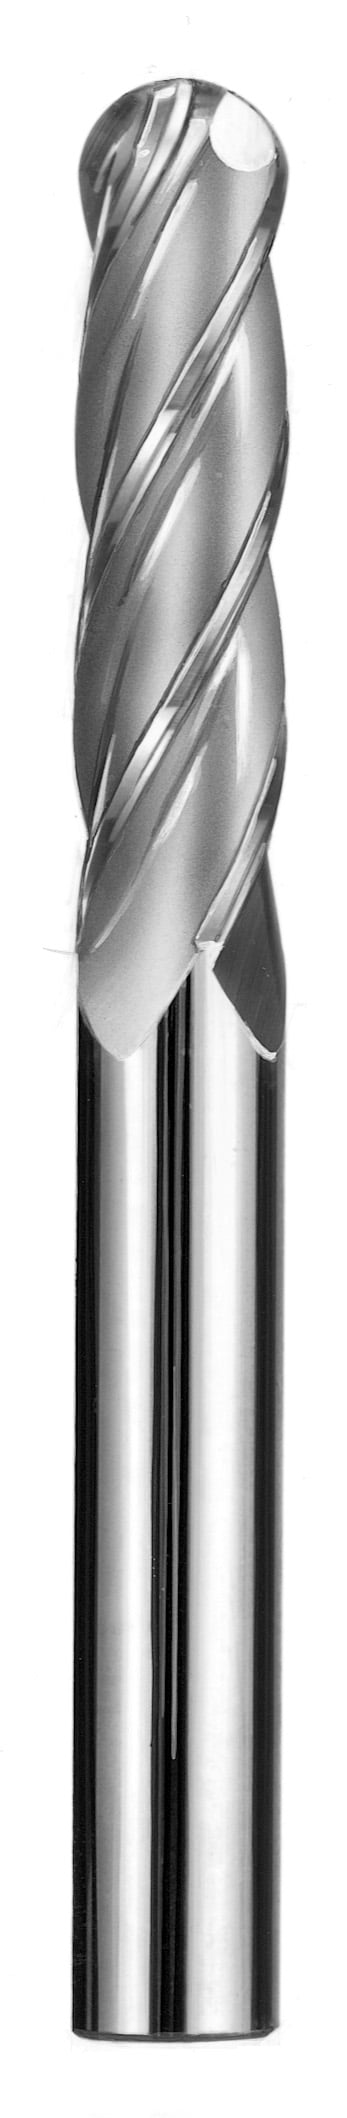 7/16" Dia, 4 Flute, Ball Nose End Mill - 33110